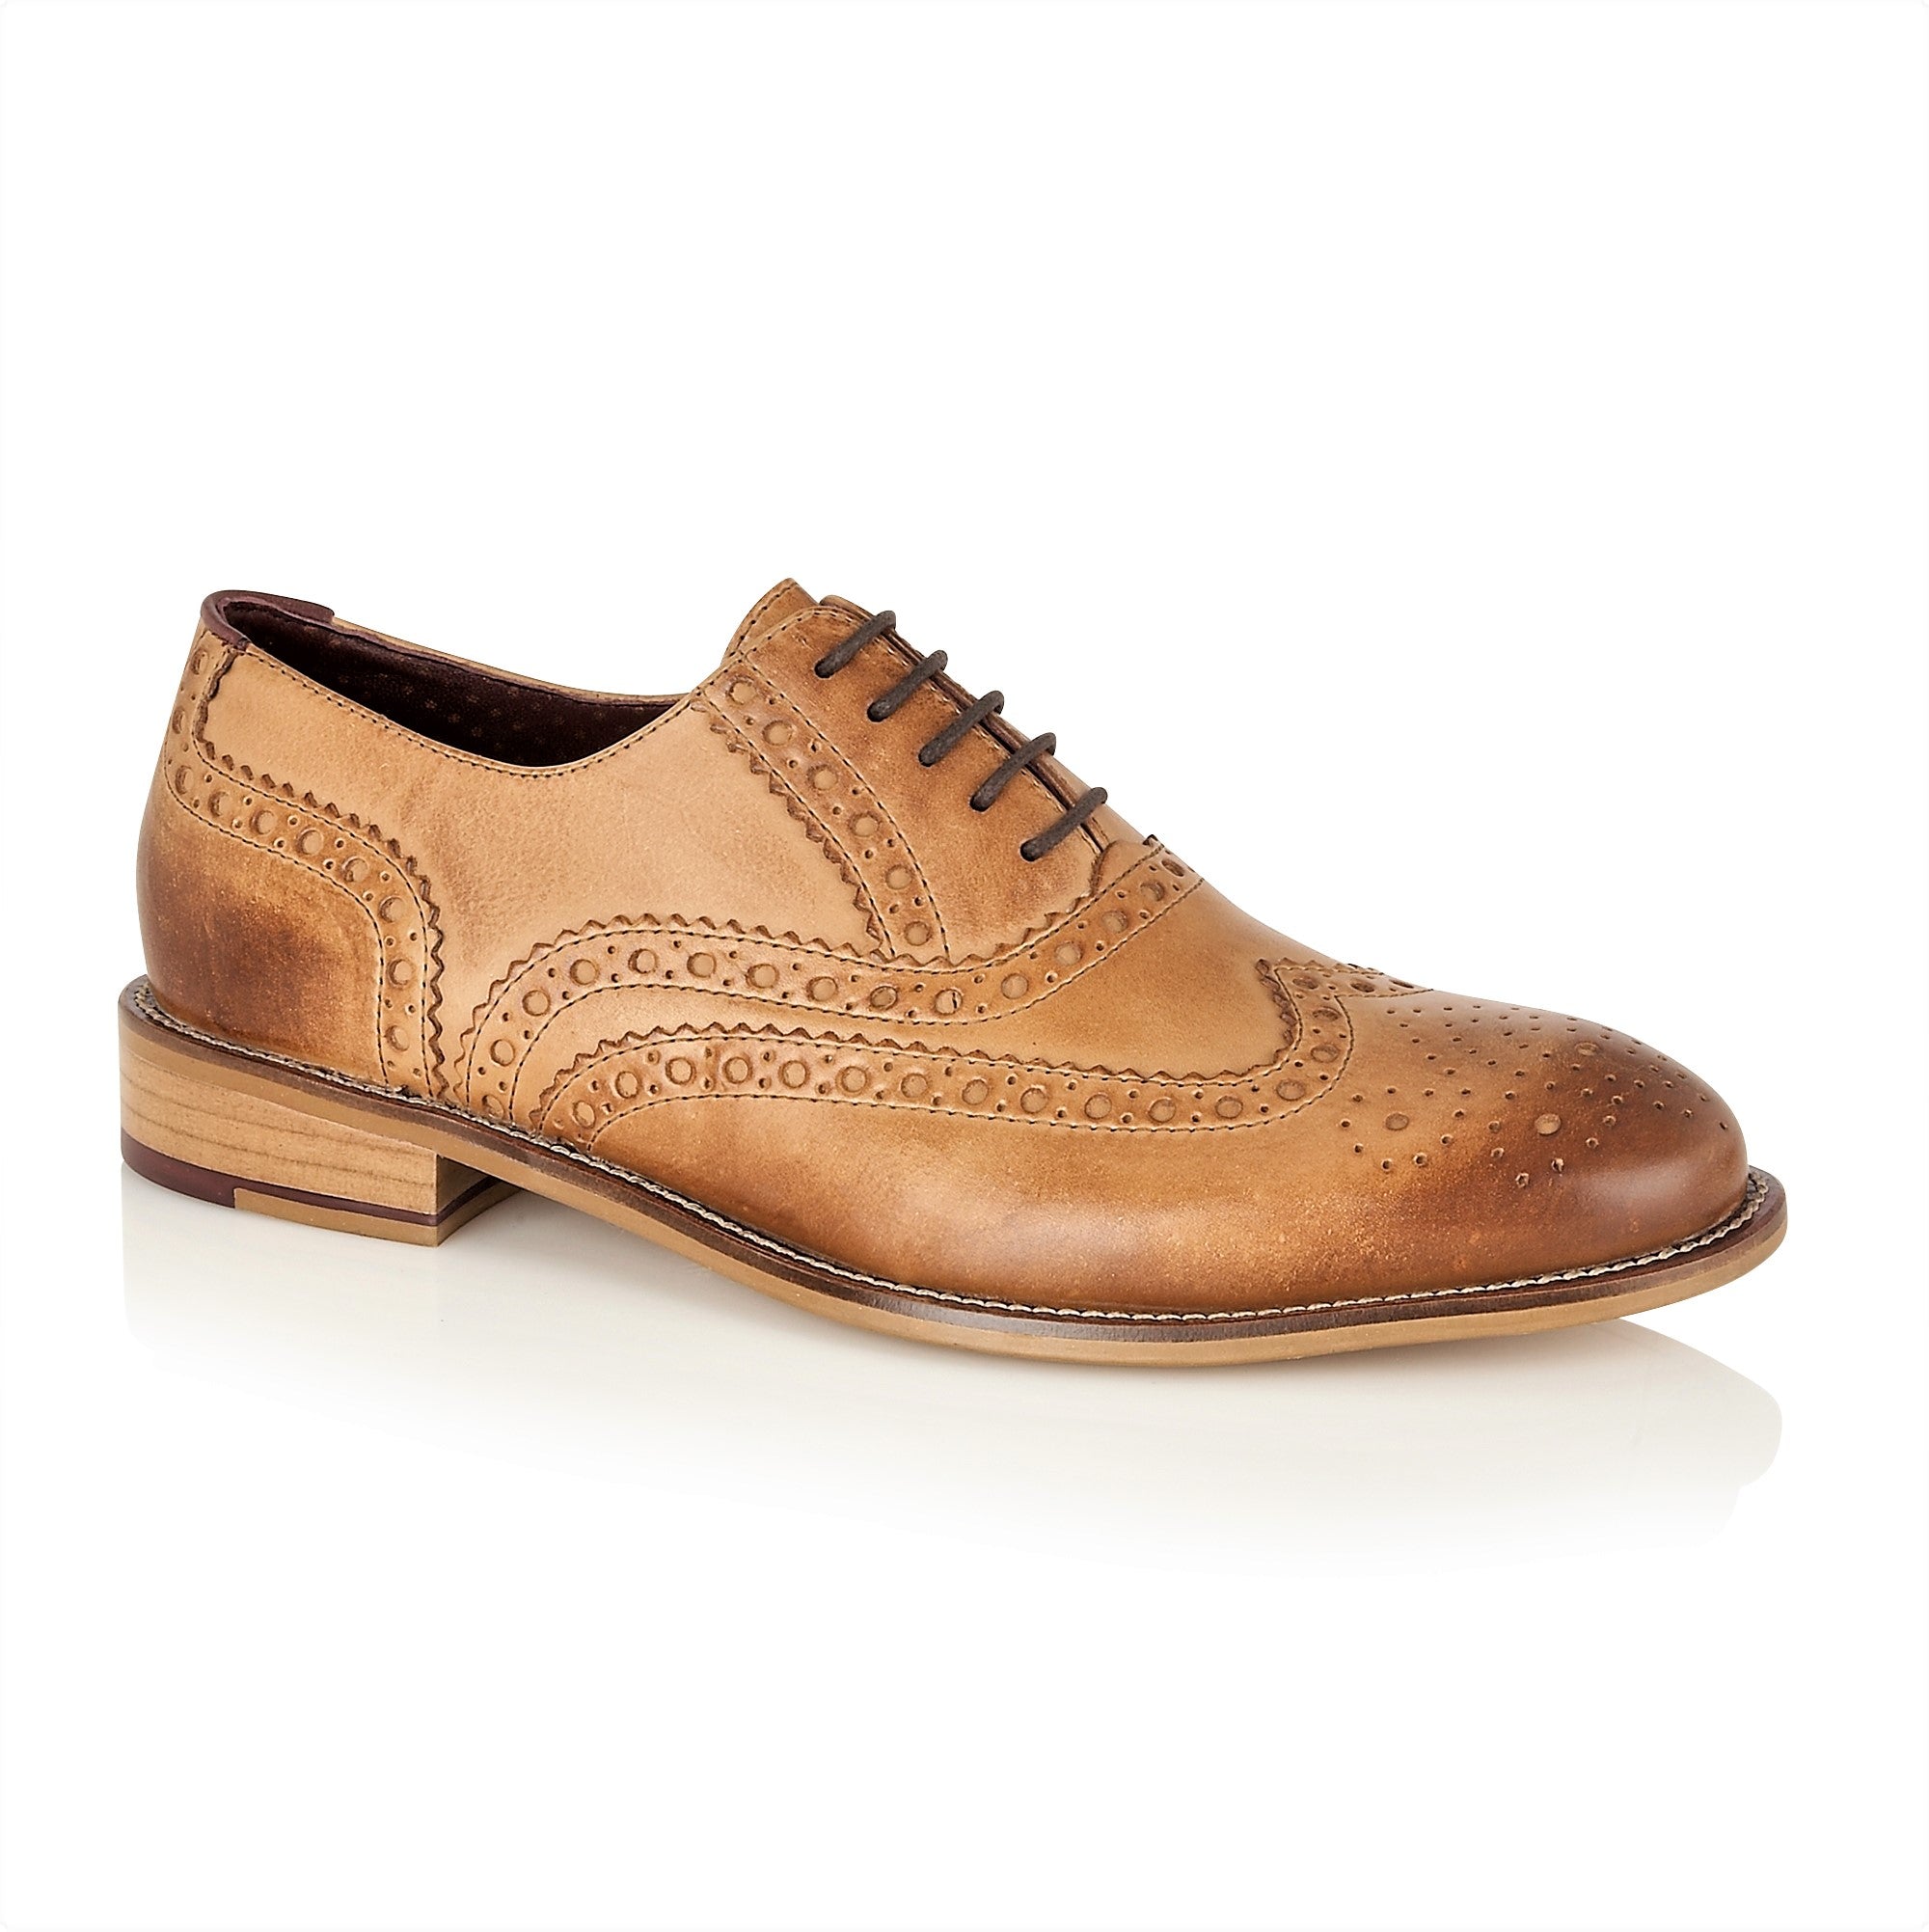 Gatsby Leather Brogue Tan - Wide Fit, Shoes, London Brogues  - London Brogues